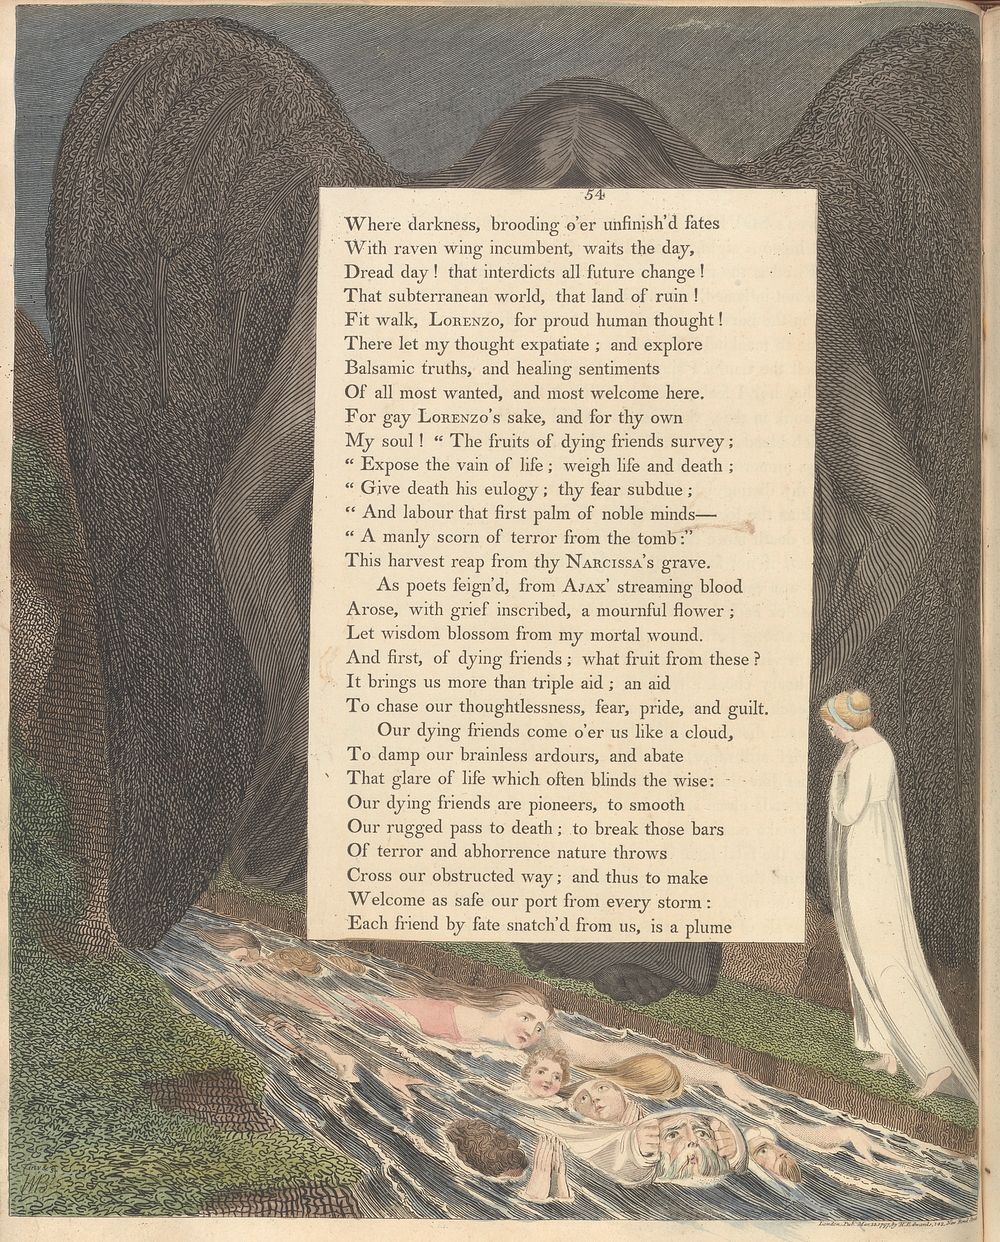 Young's Night Thoughts, Page 54, "The vale of death! that hush'd cimmerian vale" by William Blake.